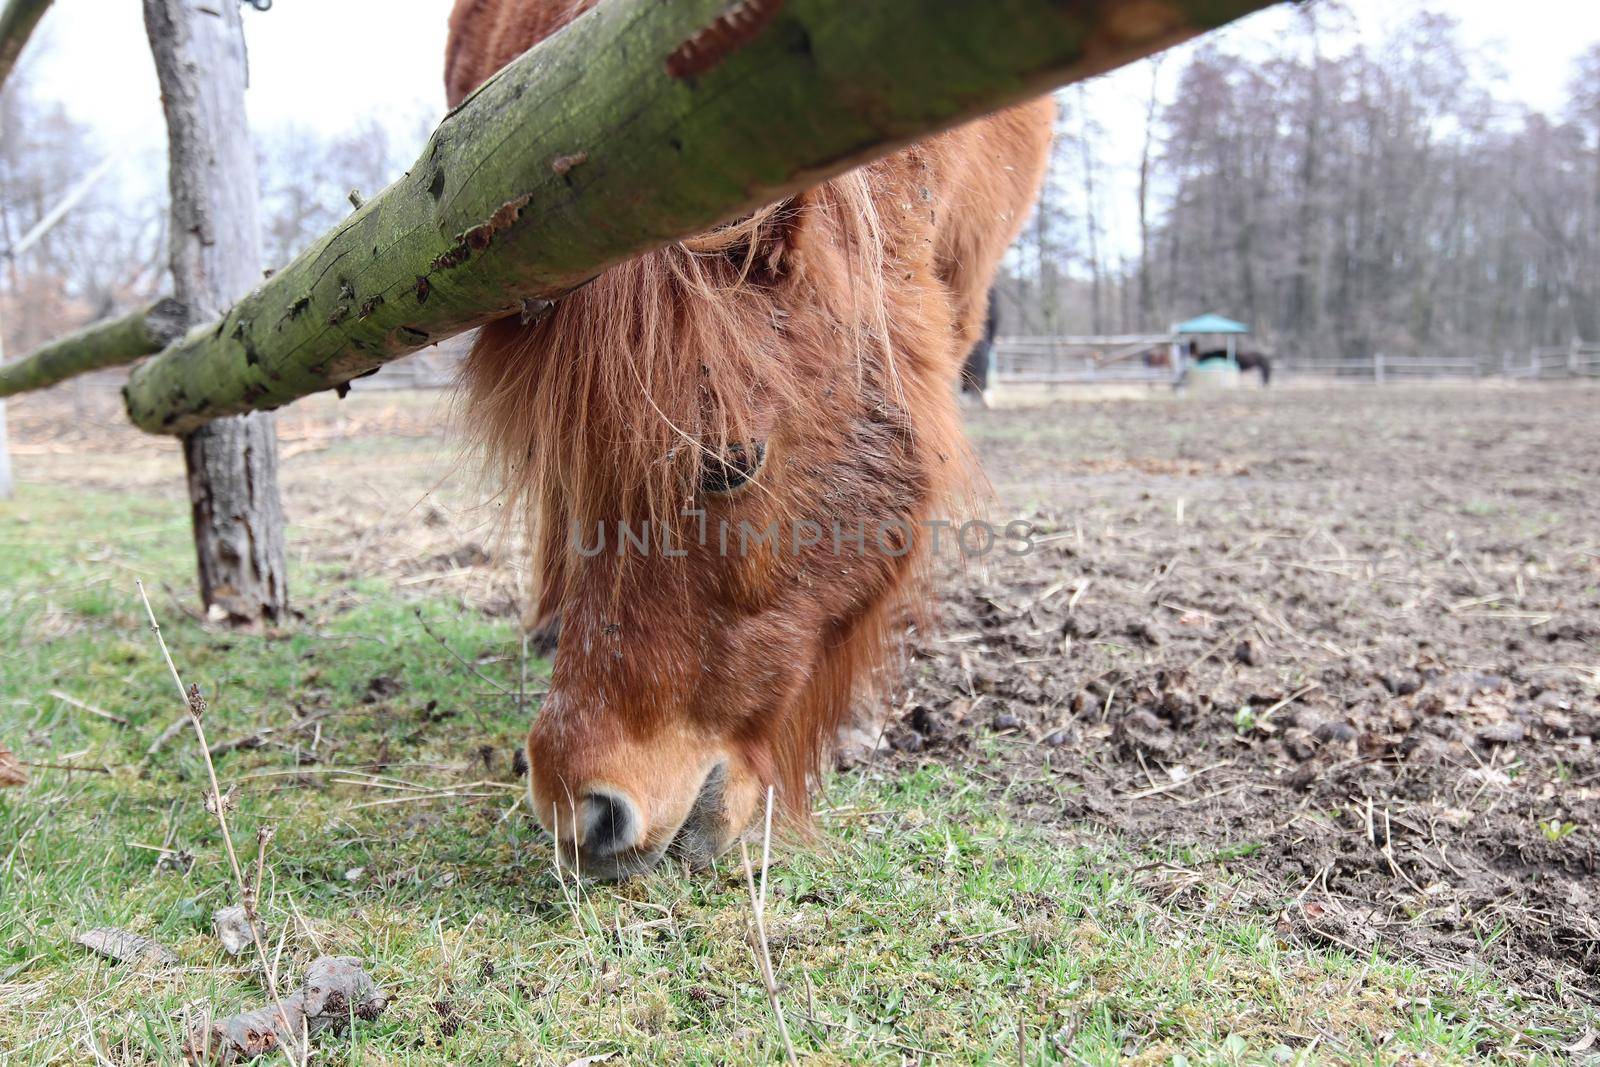 Searching for food - a horse on the graze by Mibuch